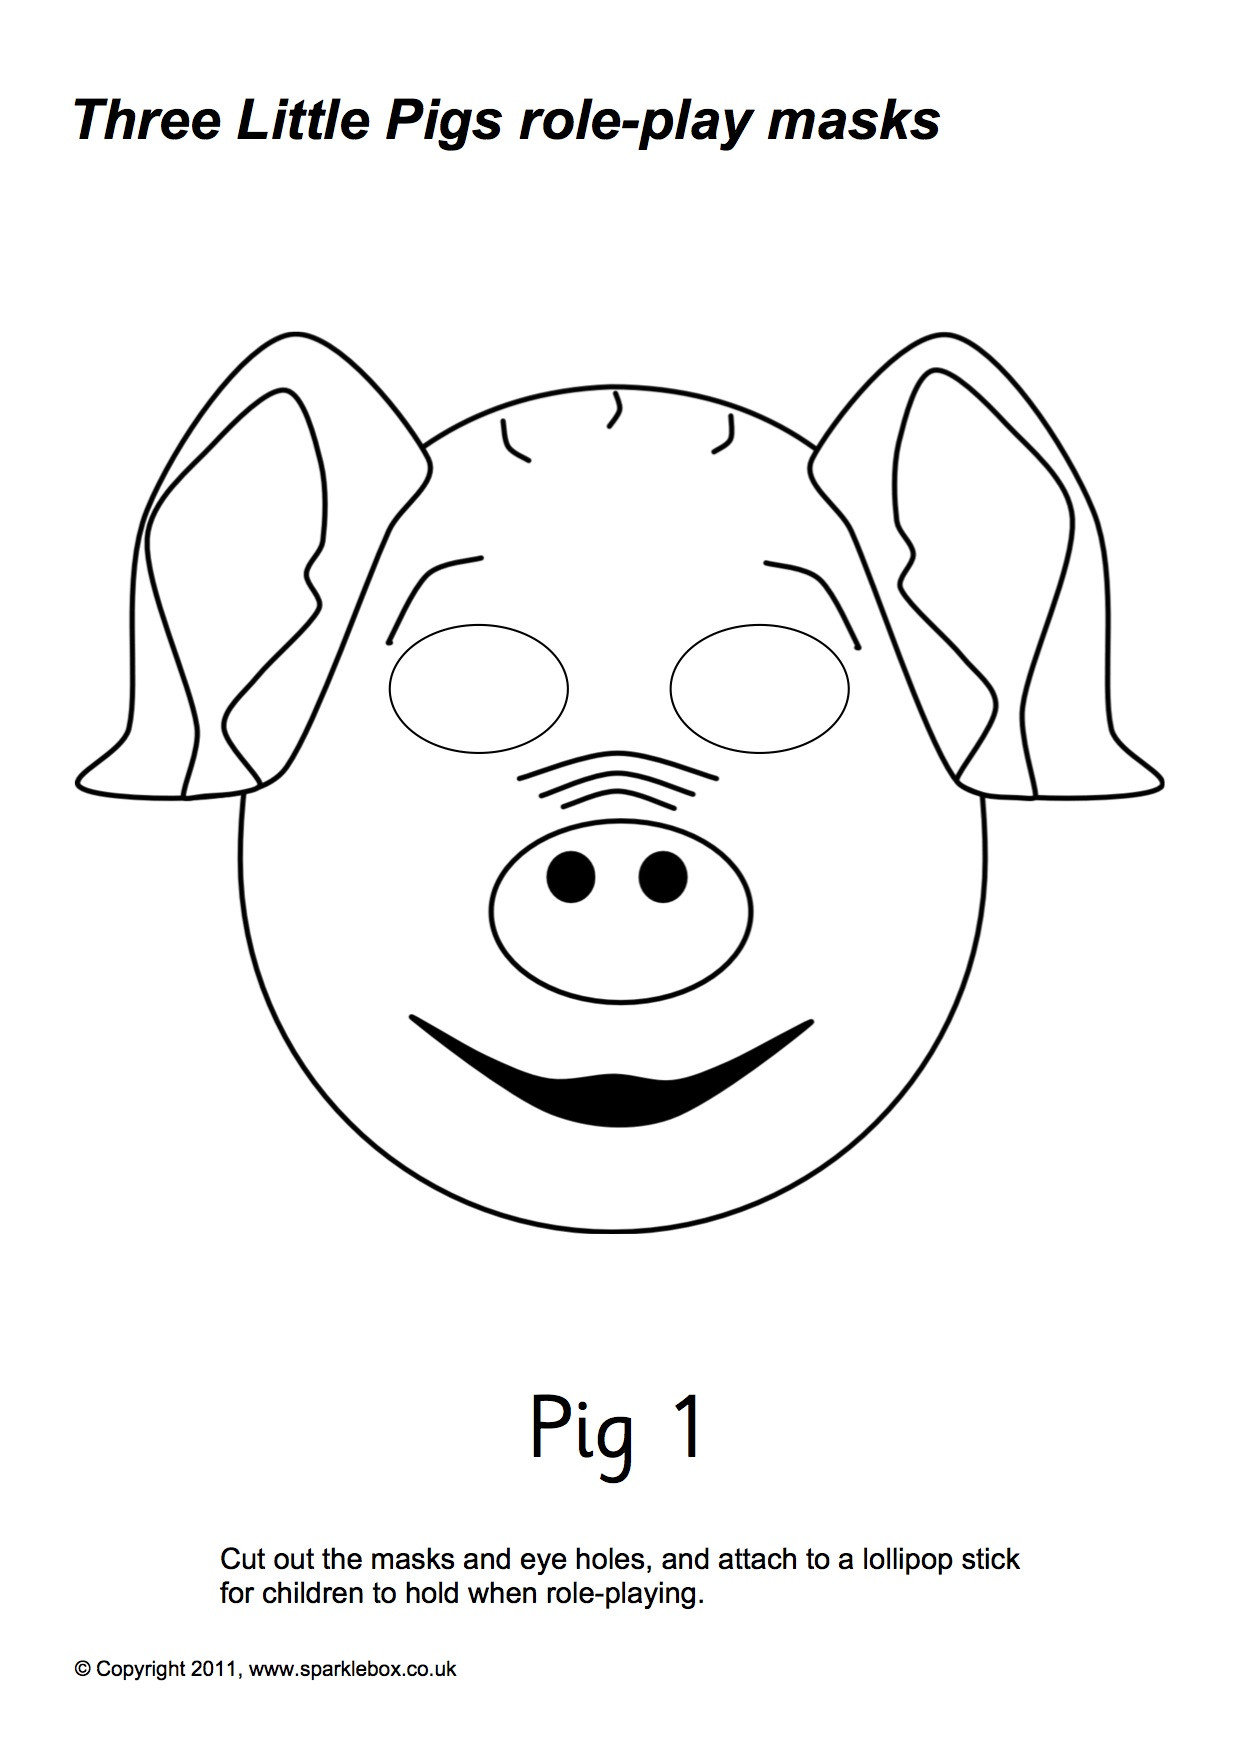 Preschool Coloring Sheets For The 3 Little Pigs Wolf Mask
 27 of Three Little Pigs Template